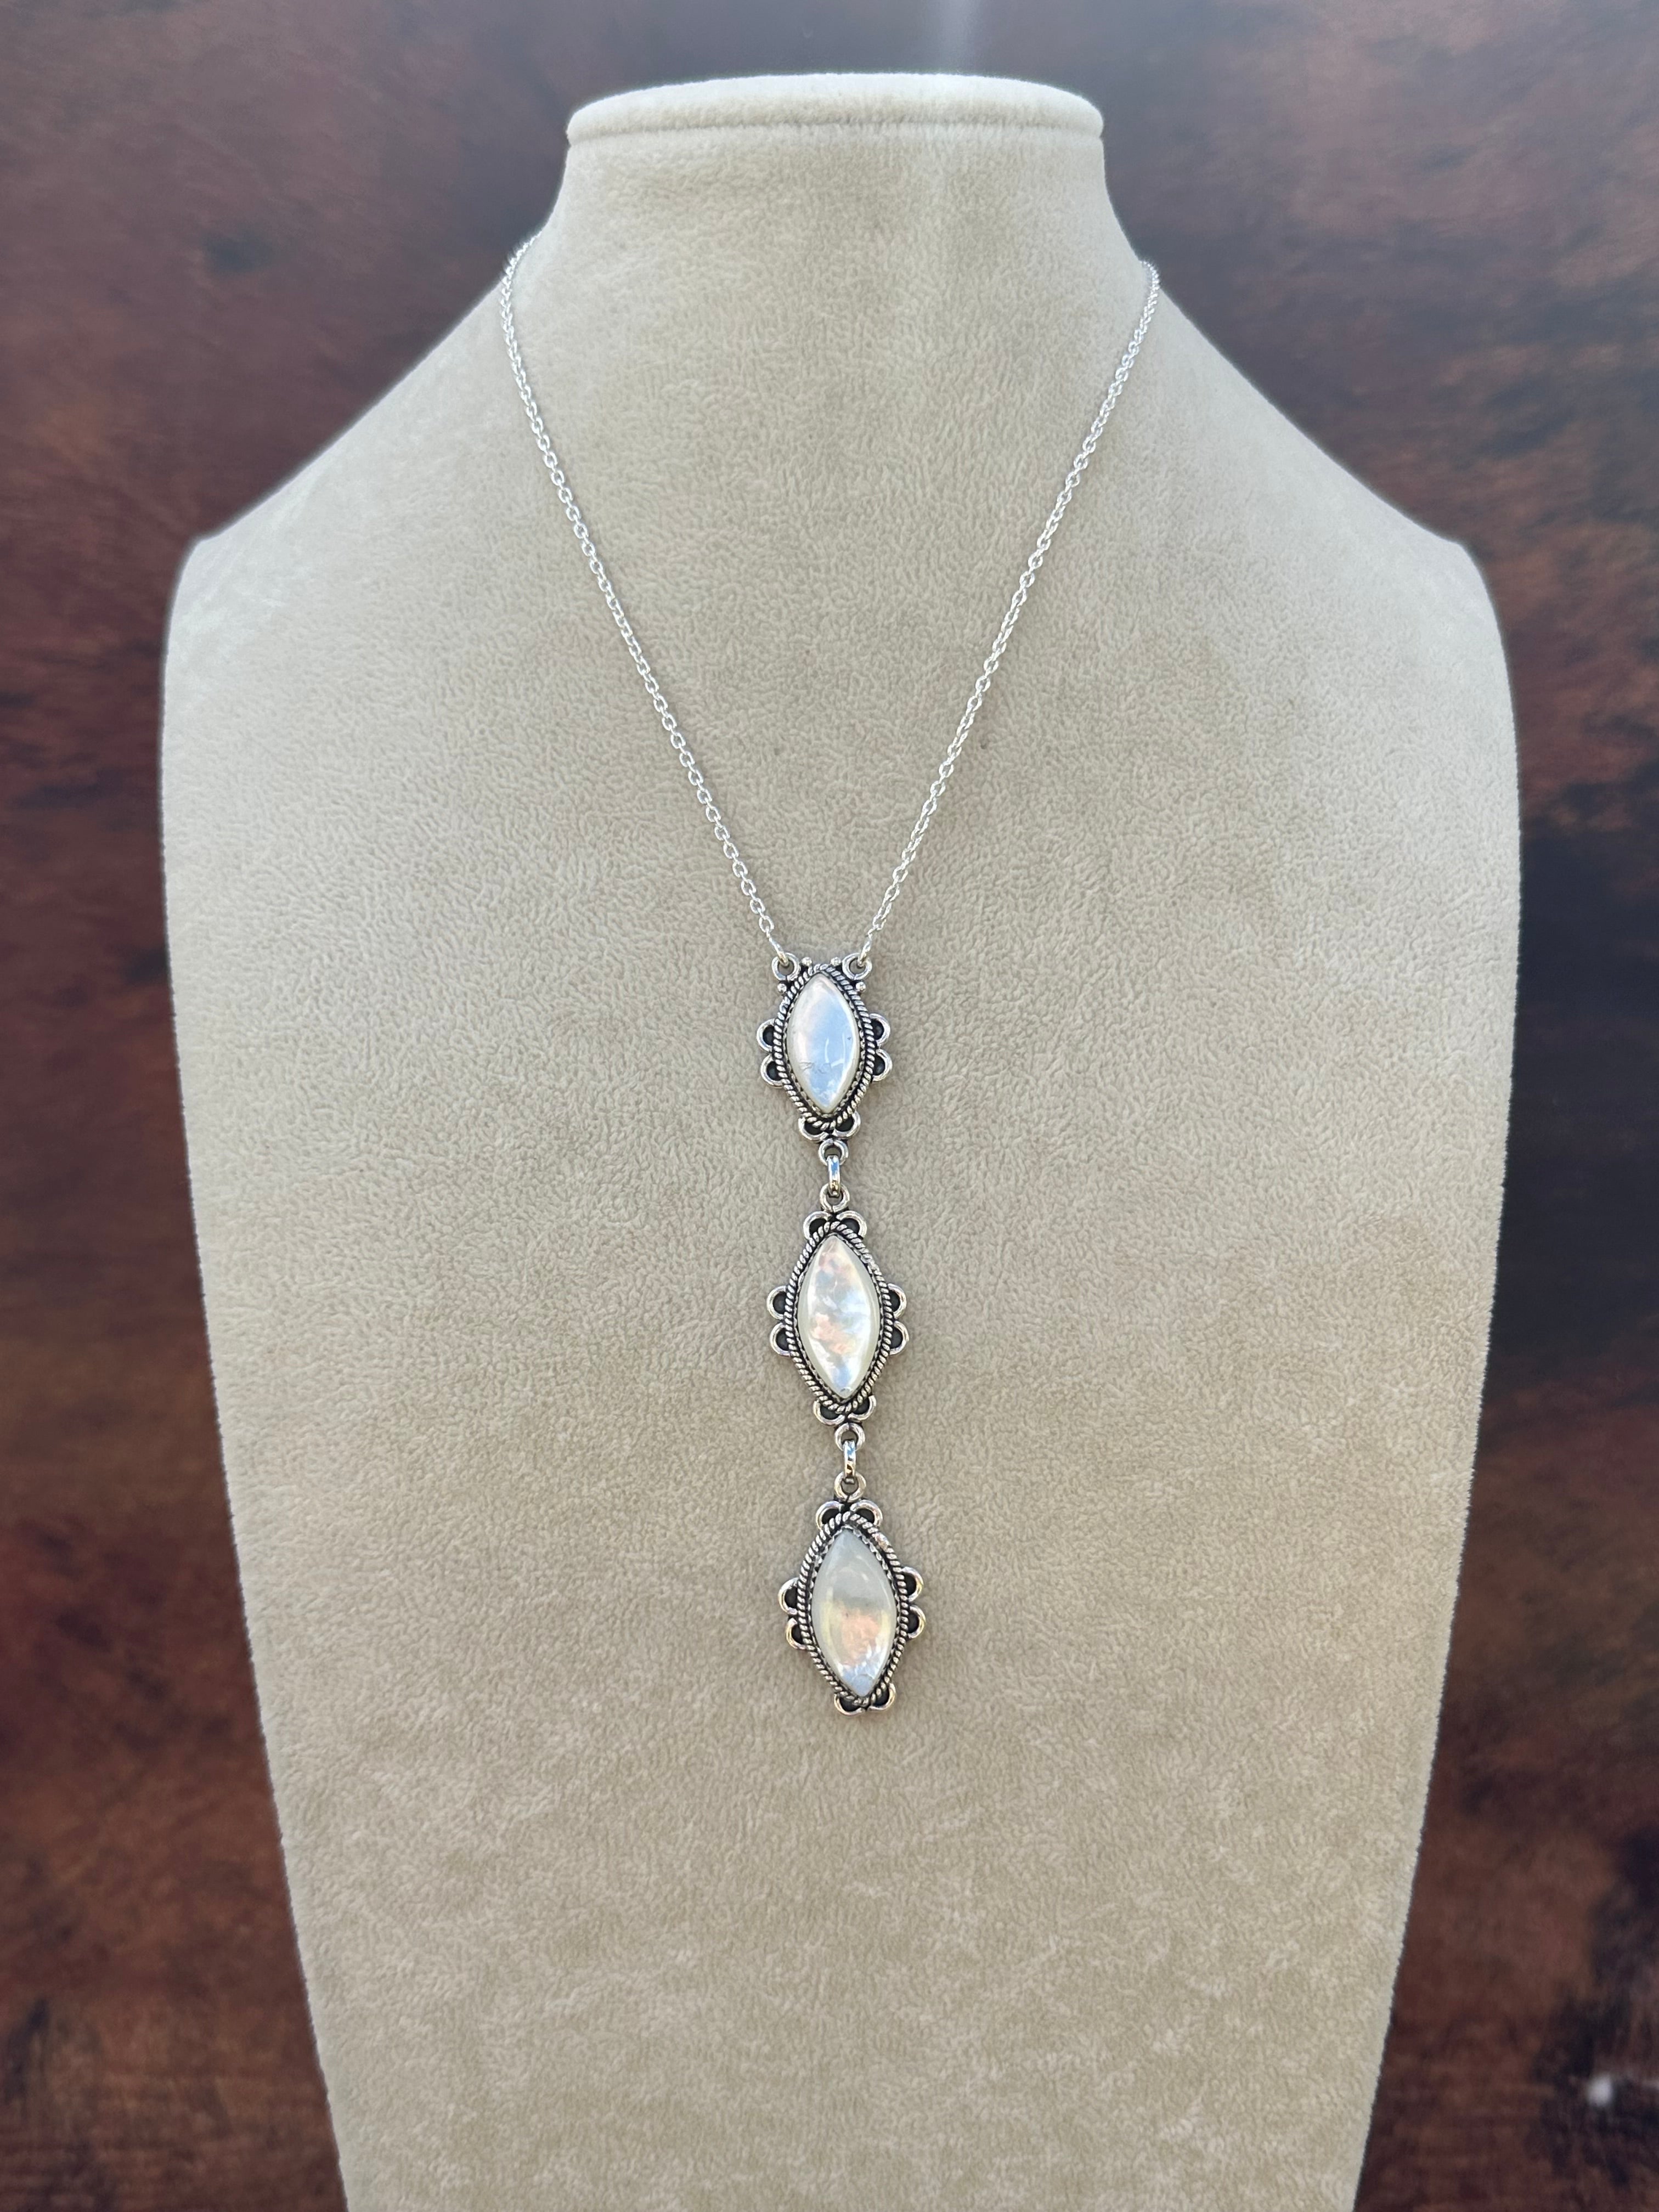 Southwest Handmade Mother of Pearl & Sterling Silver Necklace